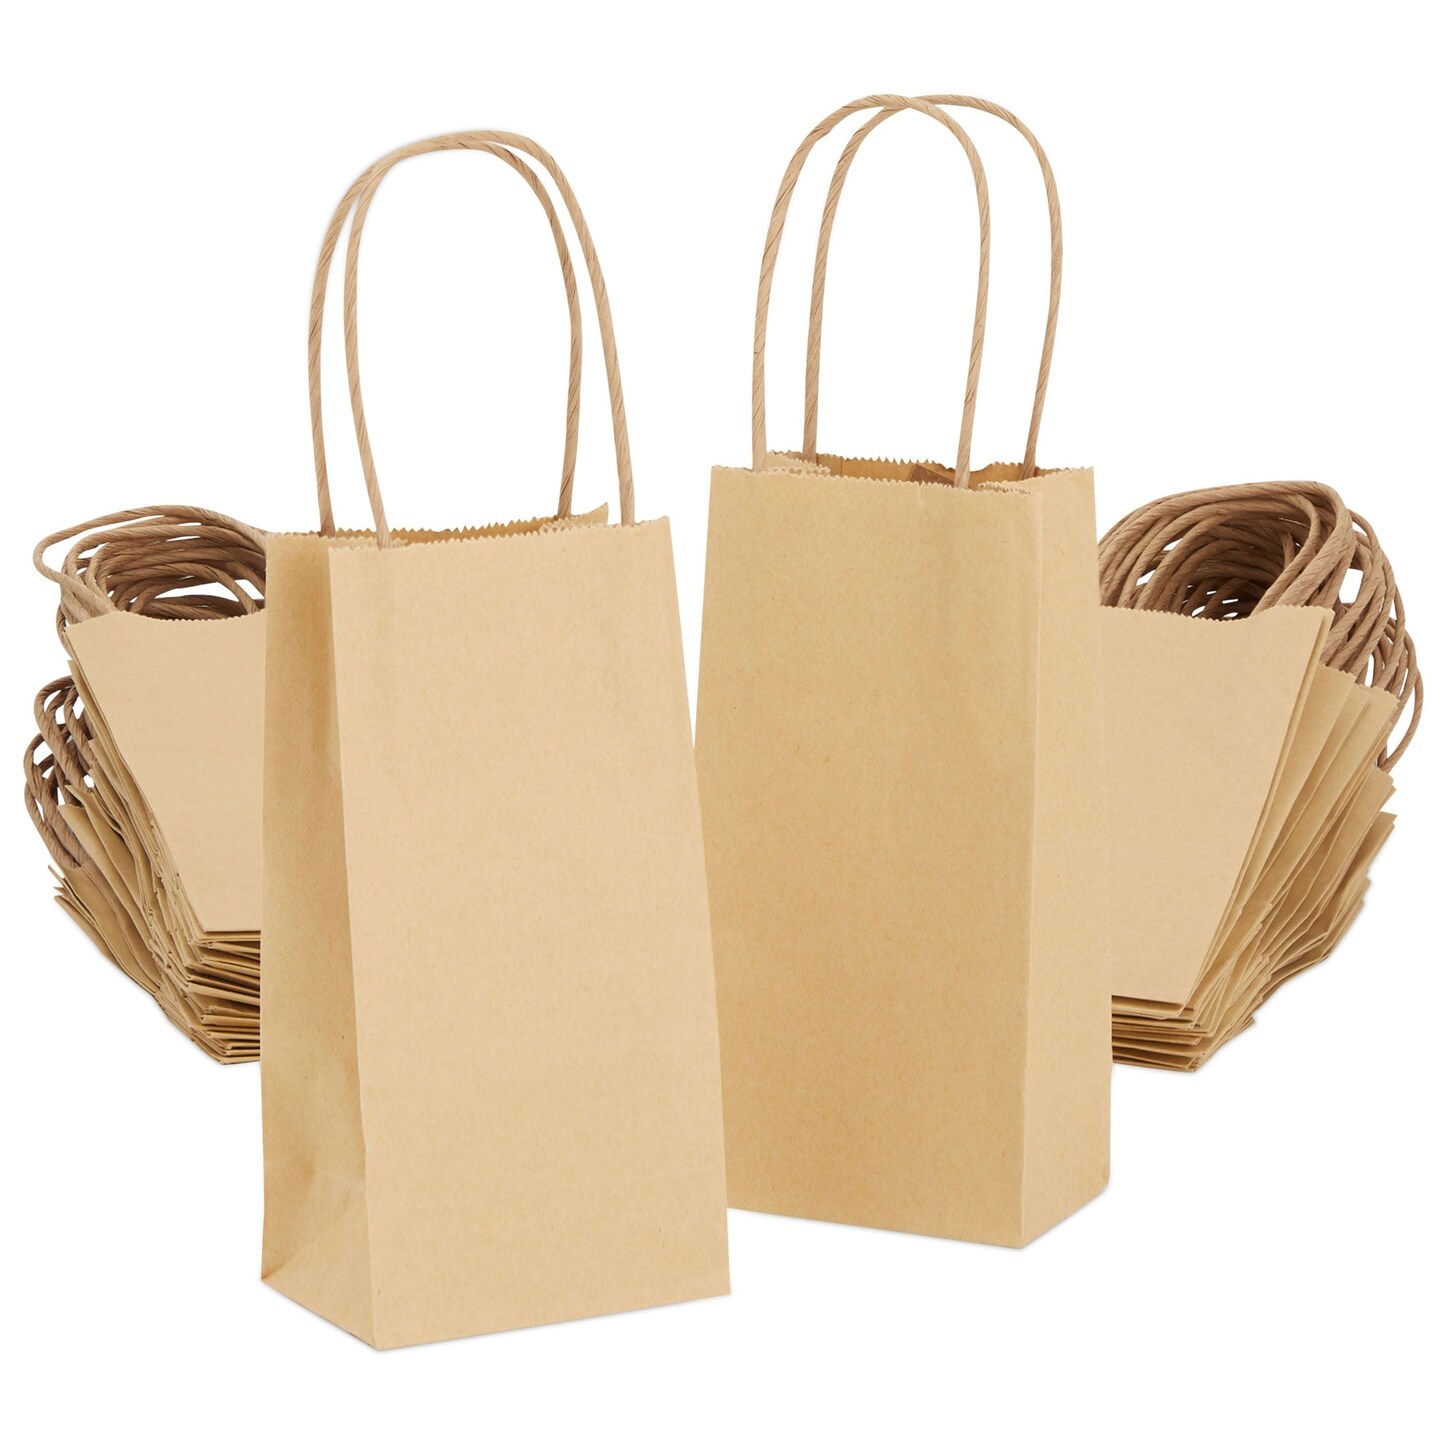 50-Pack Small Brown Gift Bags with Handles - Small Kraft Paper Bags for Birthday, Retail, Crafts (3.5x2.4x7 In)